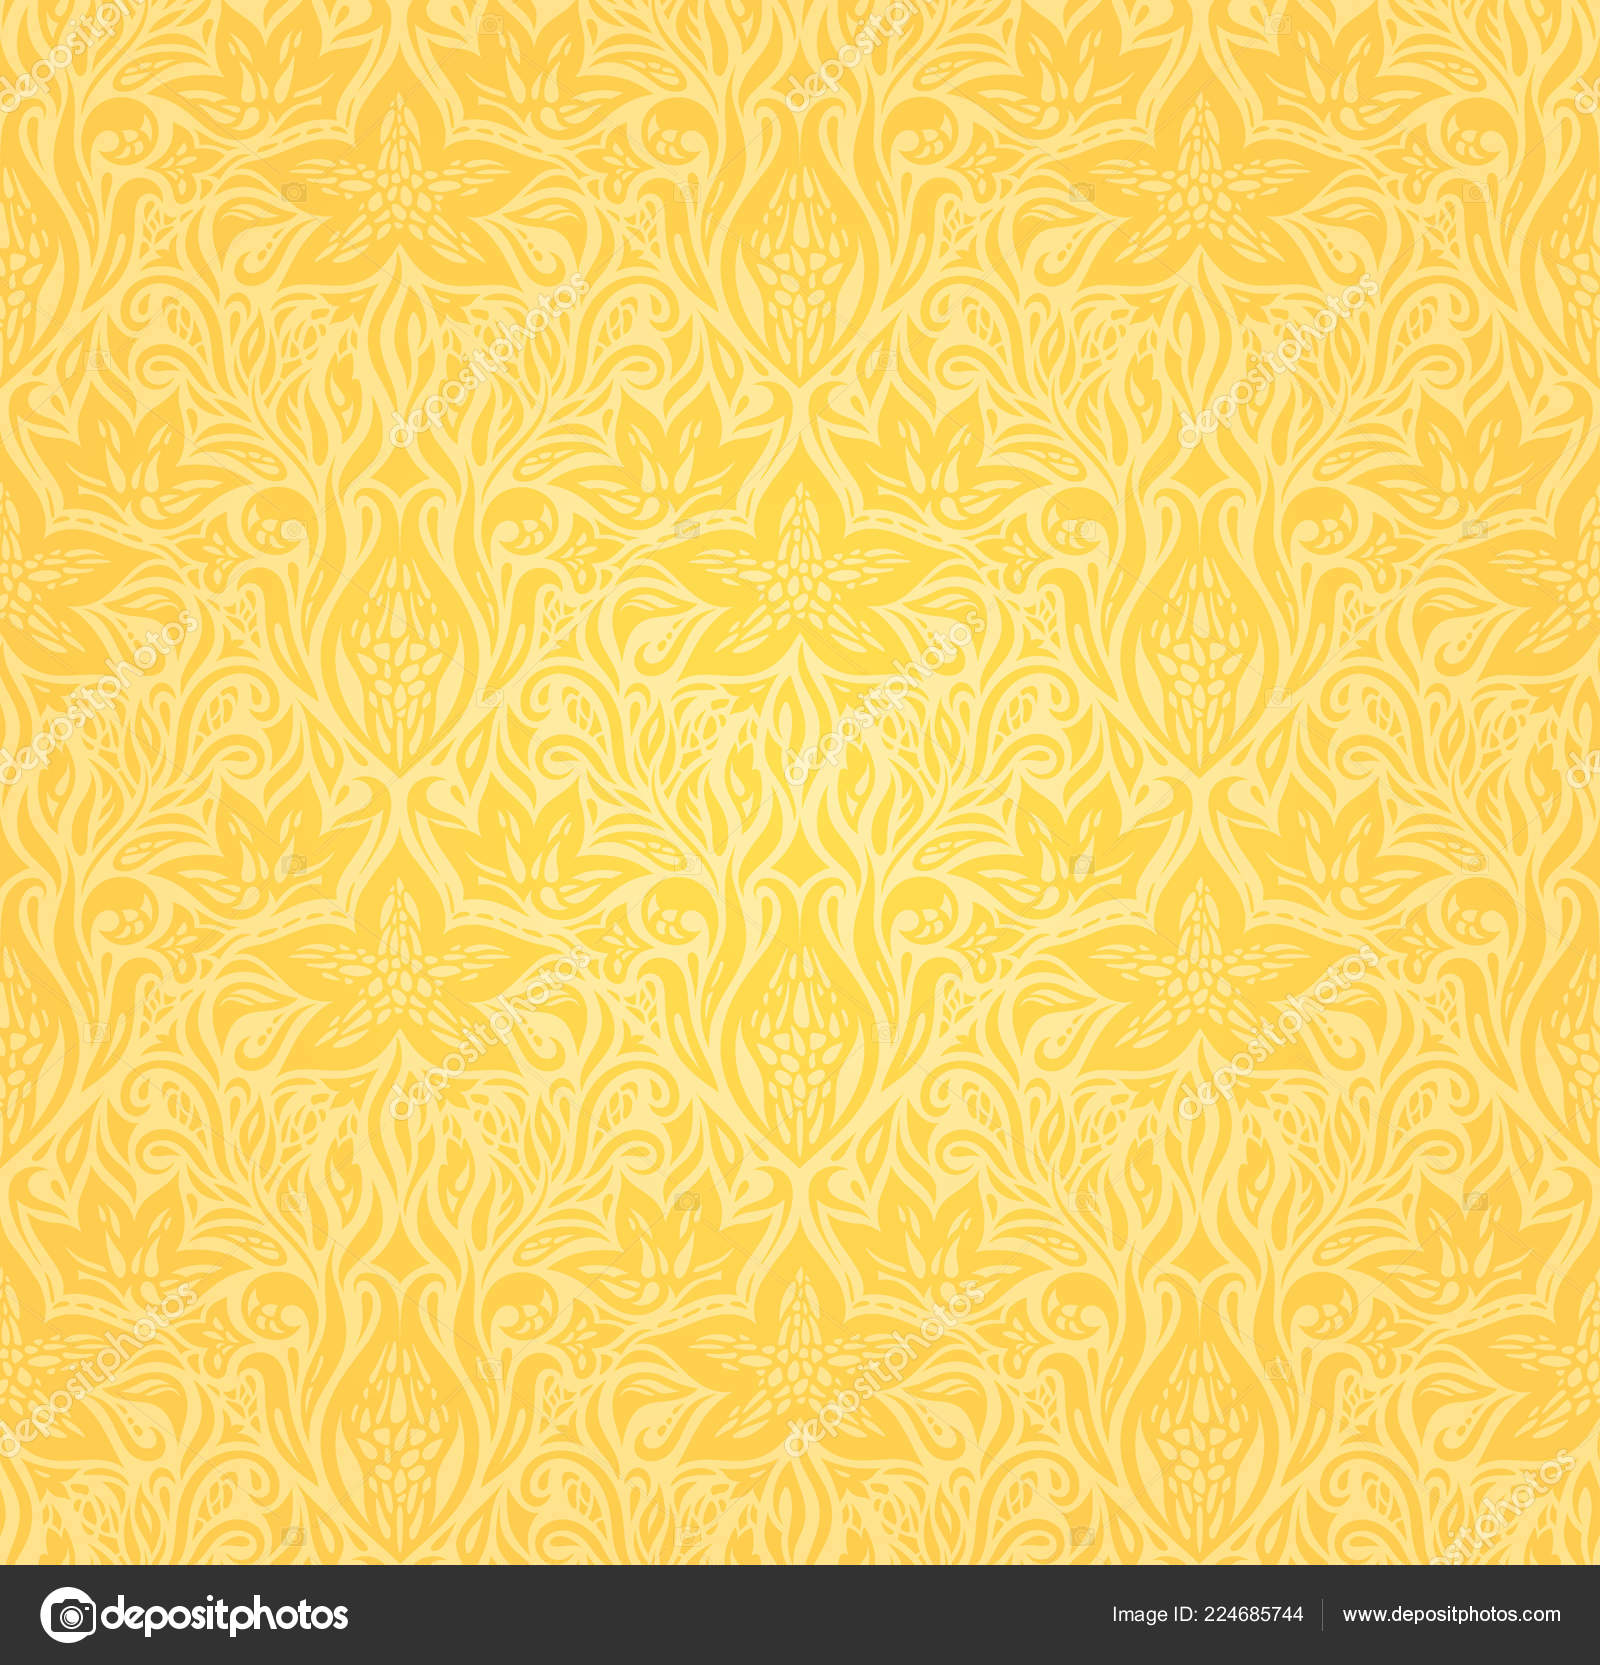 Yellow Floral Background Design - HD Wallpaper 